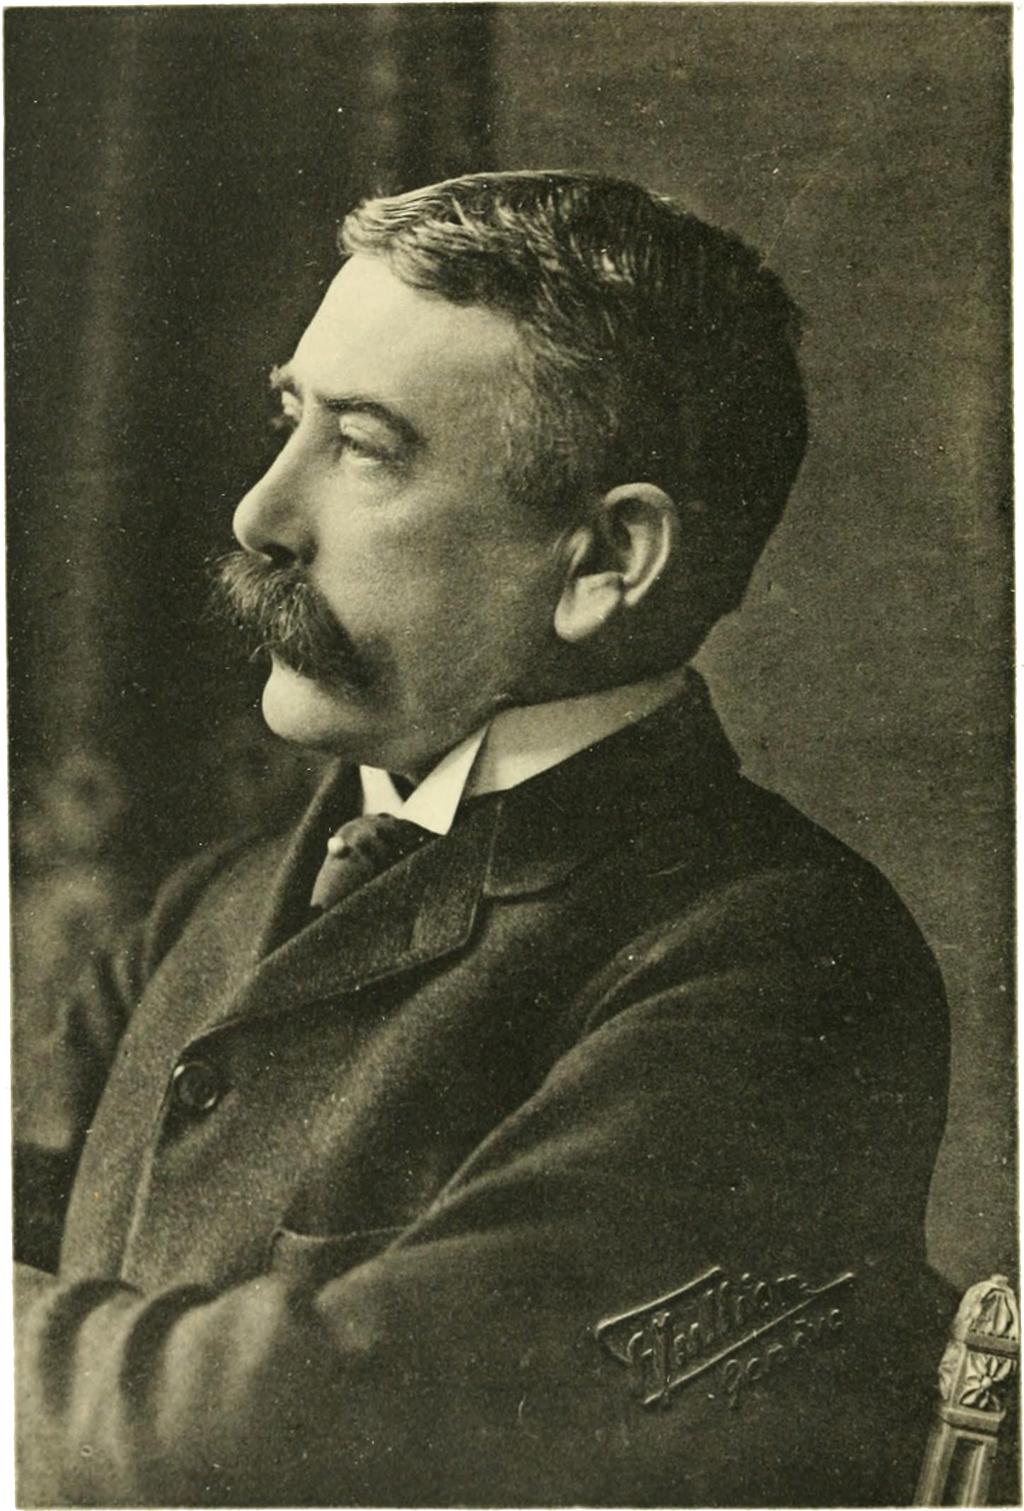 Historical Background de Saussure/Structuralism Ferdinand de Saussure (1857-1913) Ï Treated language as a formal system Ï Especially interested in semiotics (division and structure of